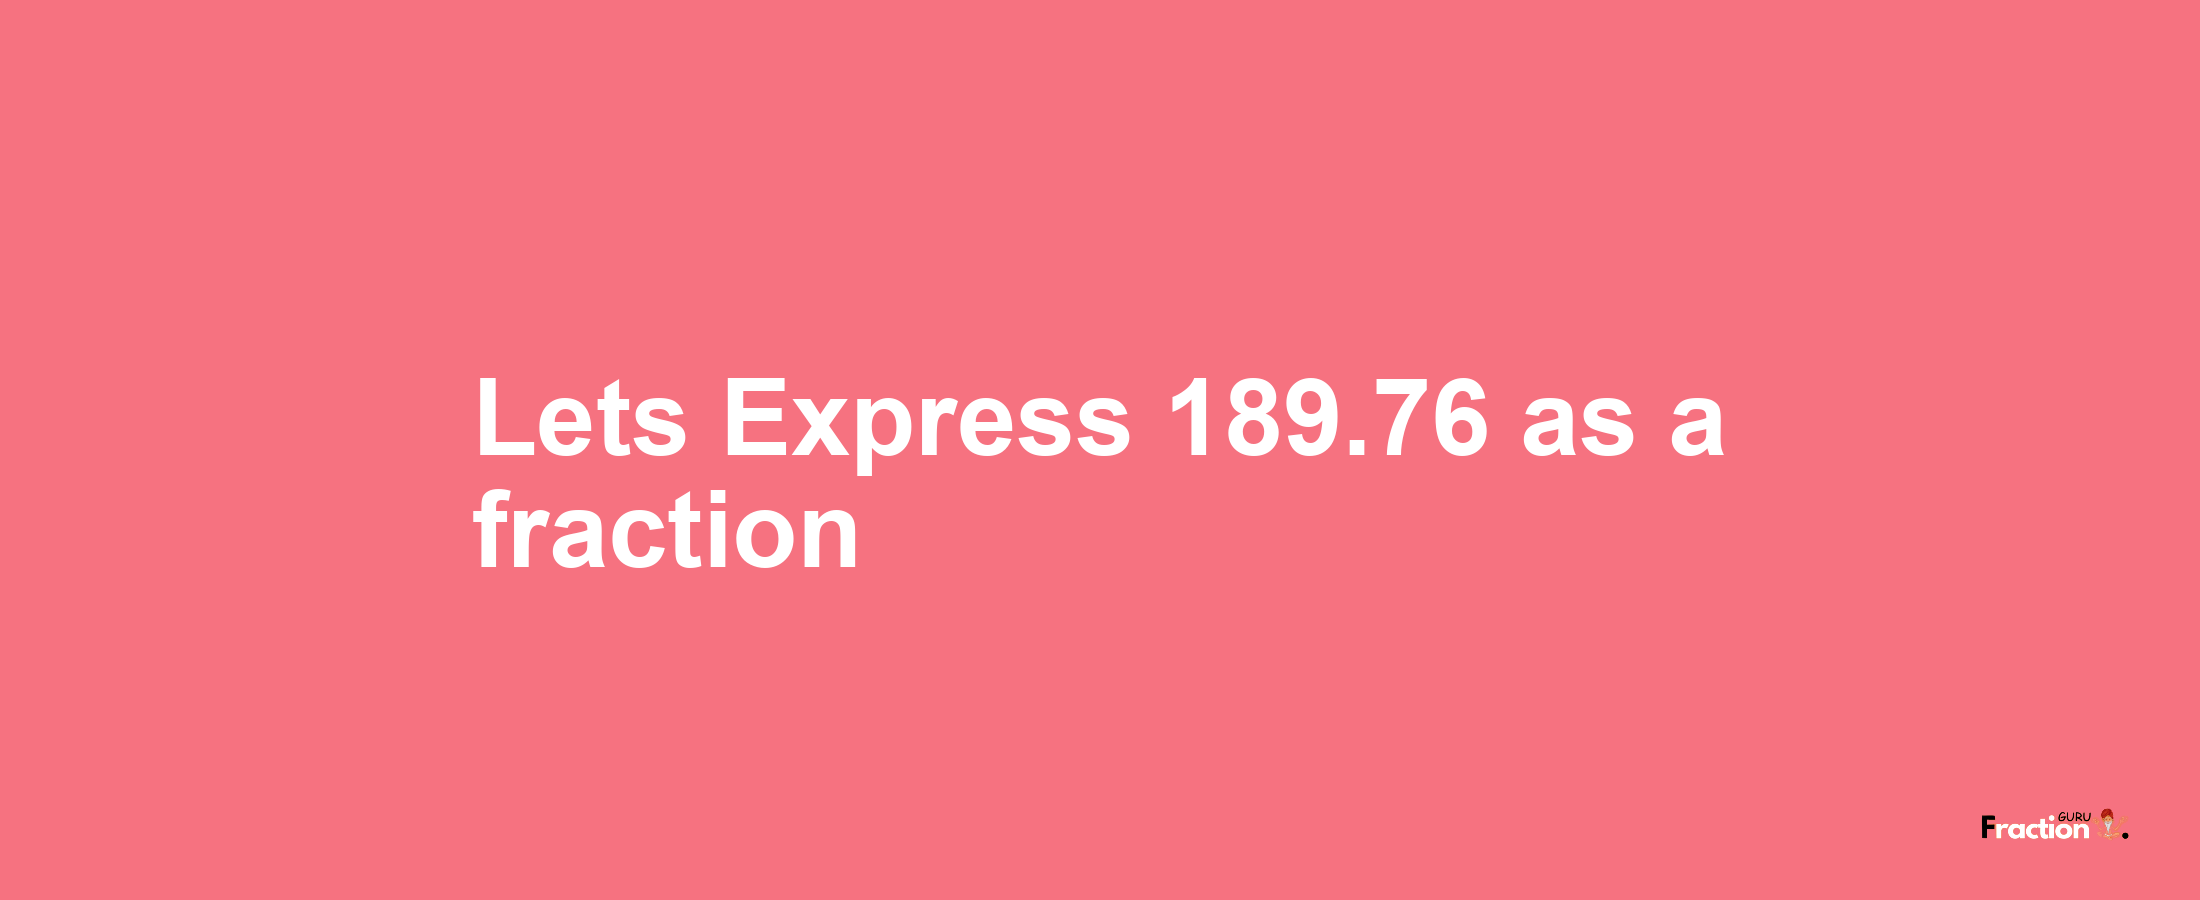 Lets Express 189.76 as afraction